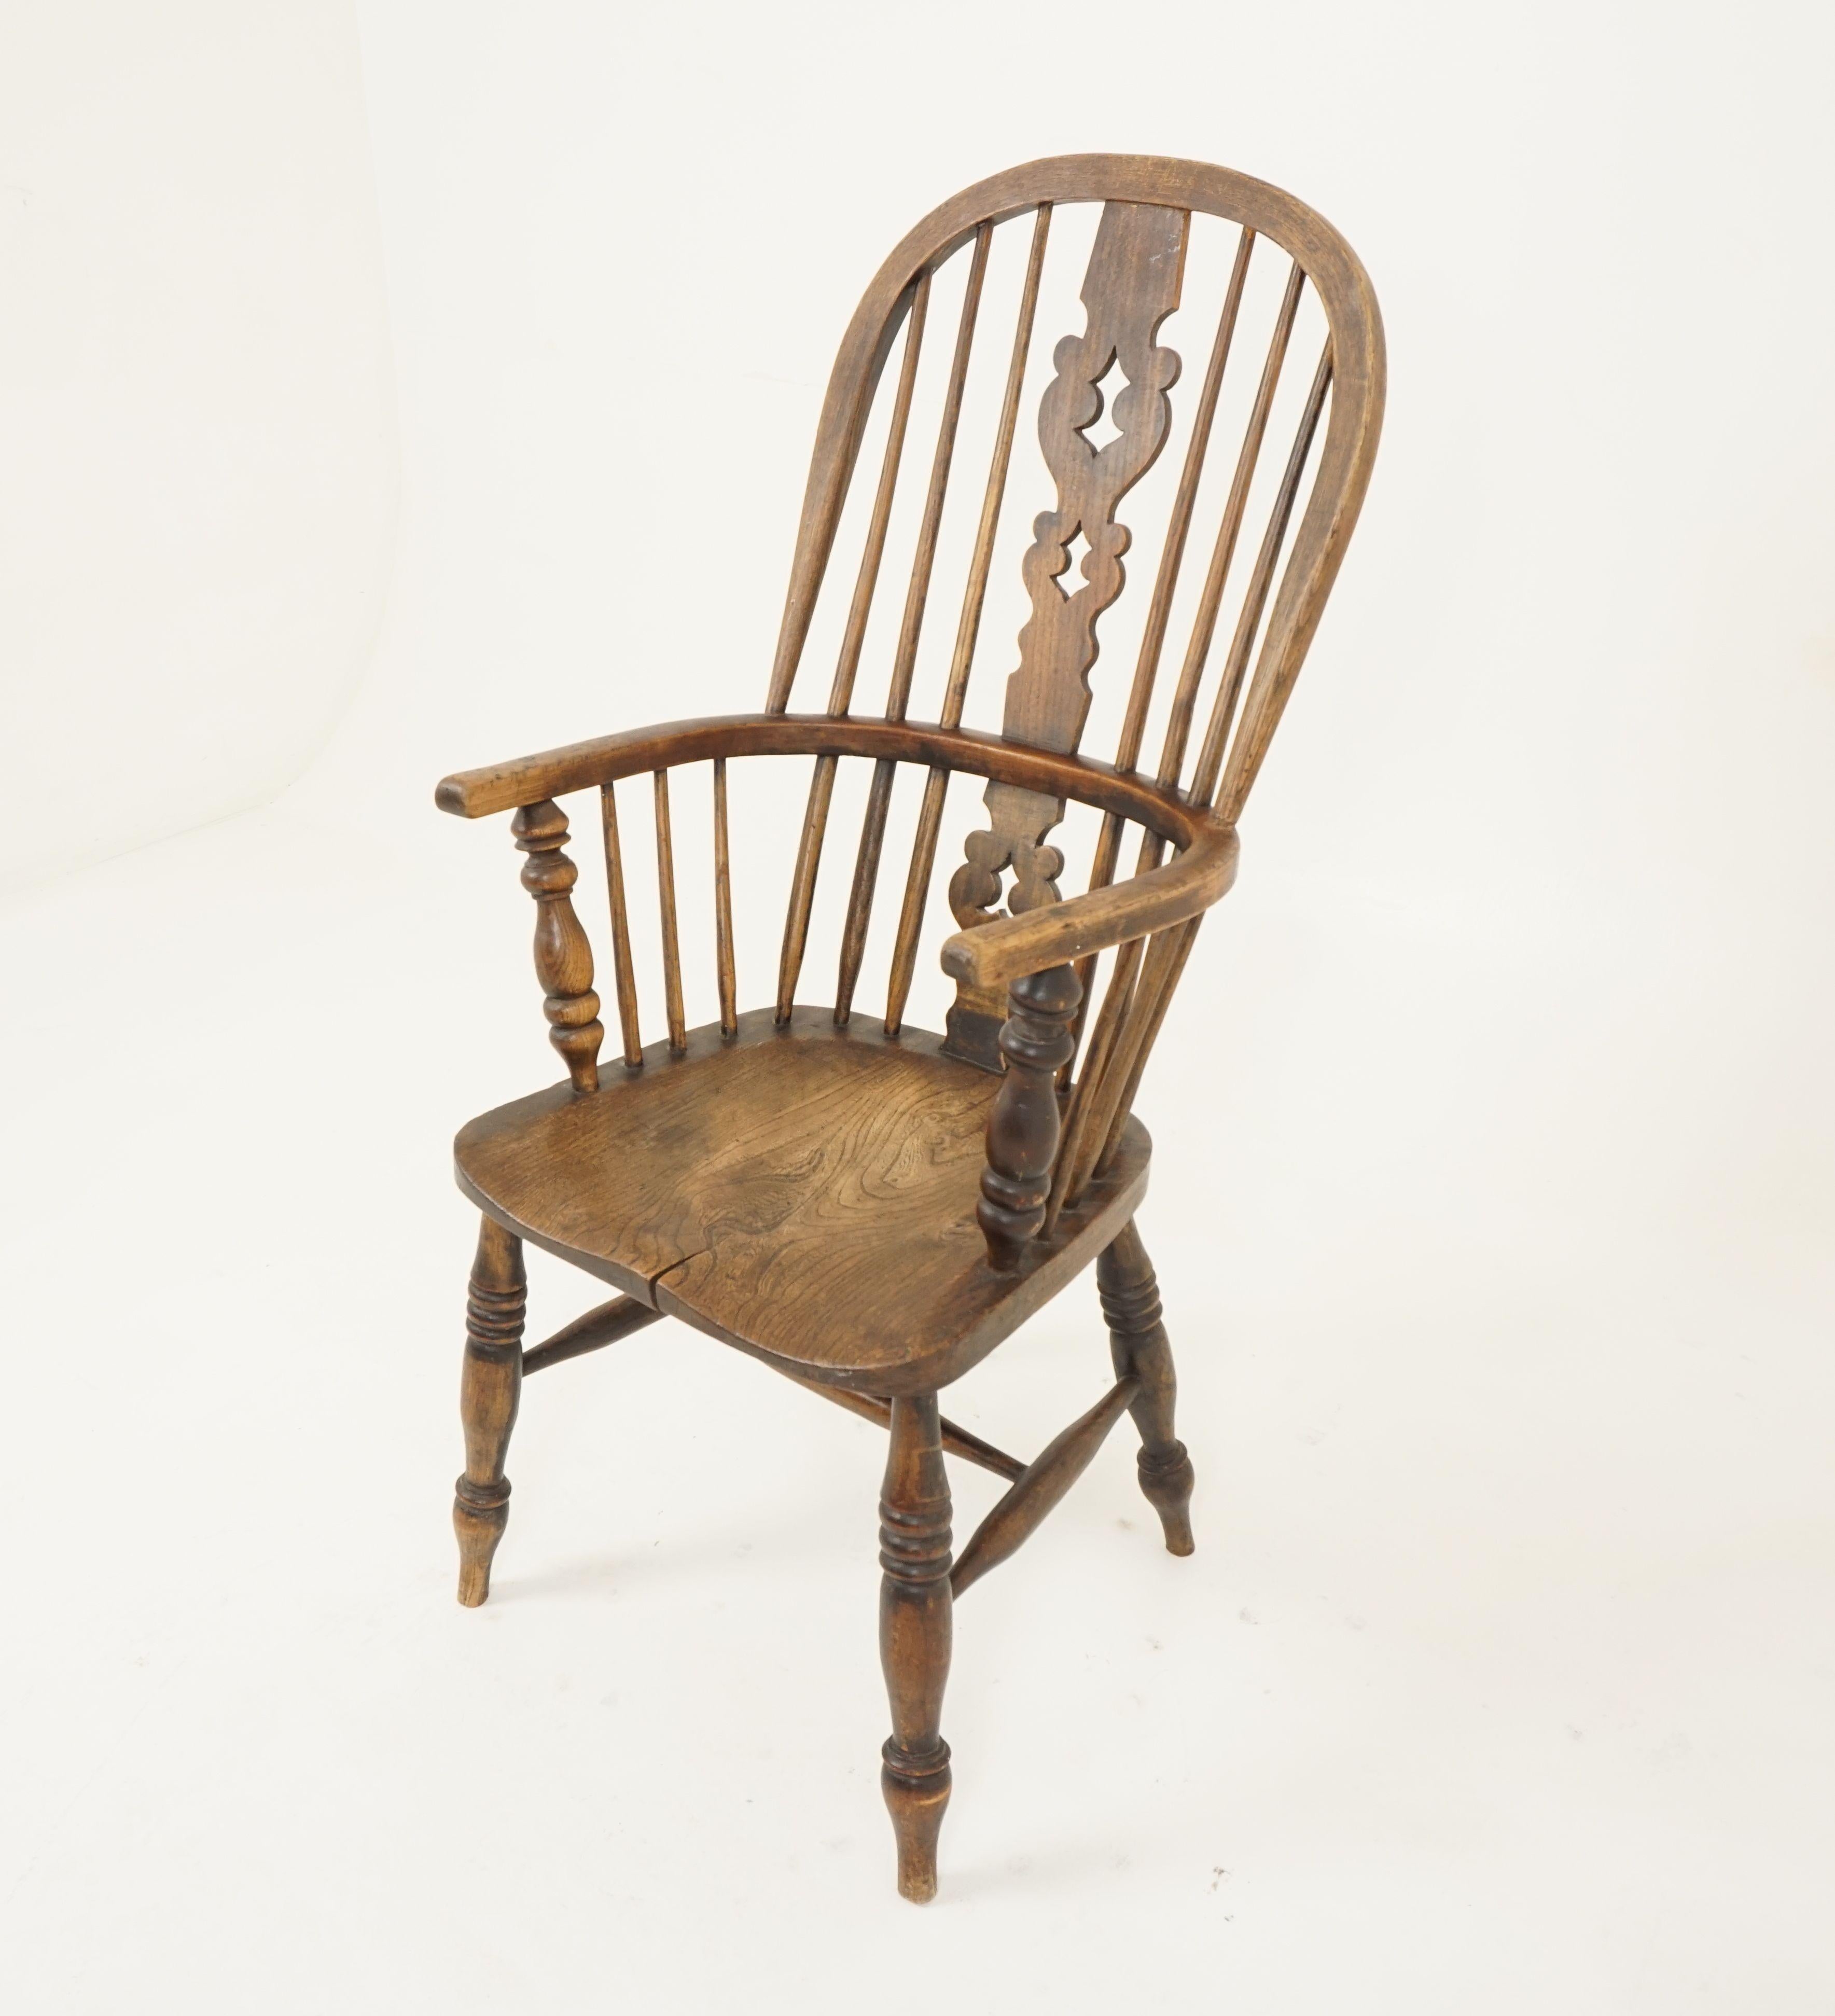 Antique Victorian chair, ash + elm, windsor arm chair, Scotland 1840, BX5

Scotland 1840
Solid ash + elm
Original finish
There is a hooped ash top rail with decorative central splat and stich back
There are also hooped arms with turned arm